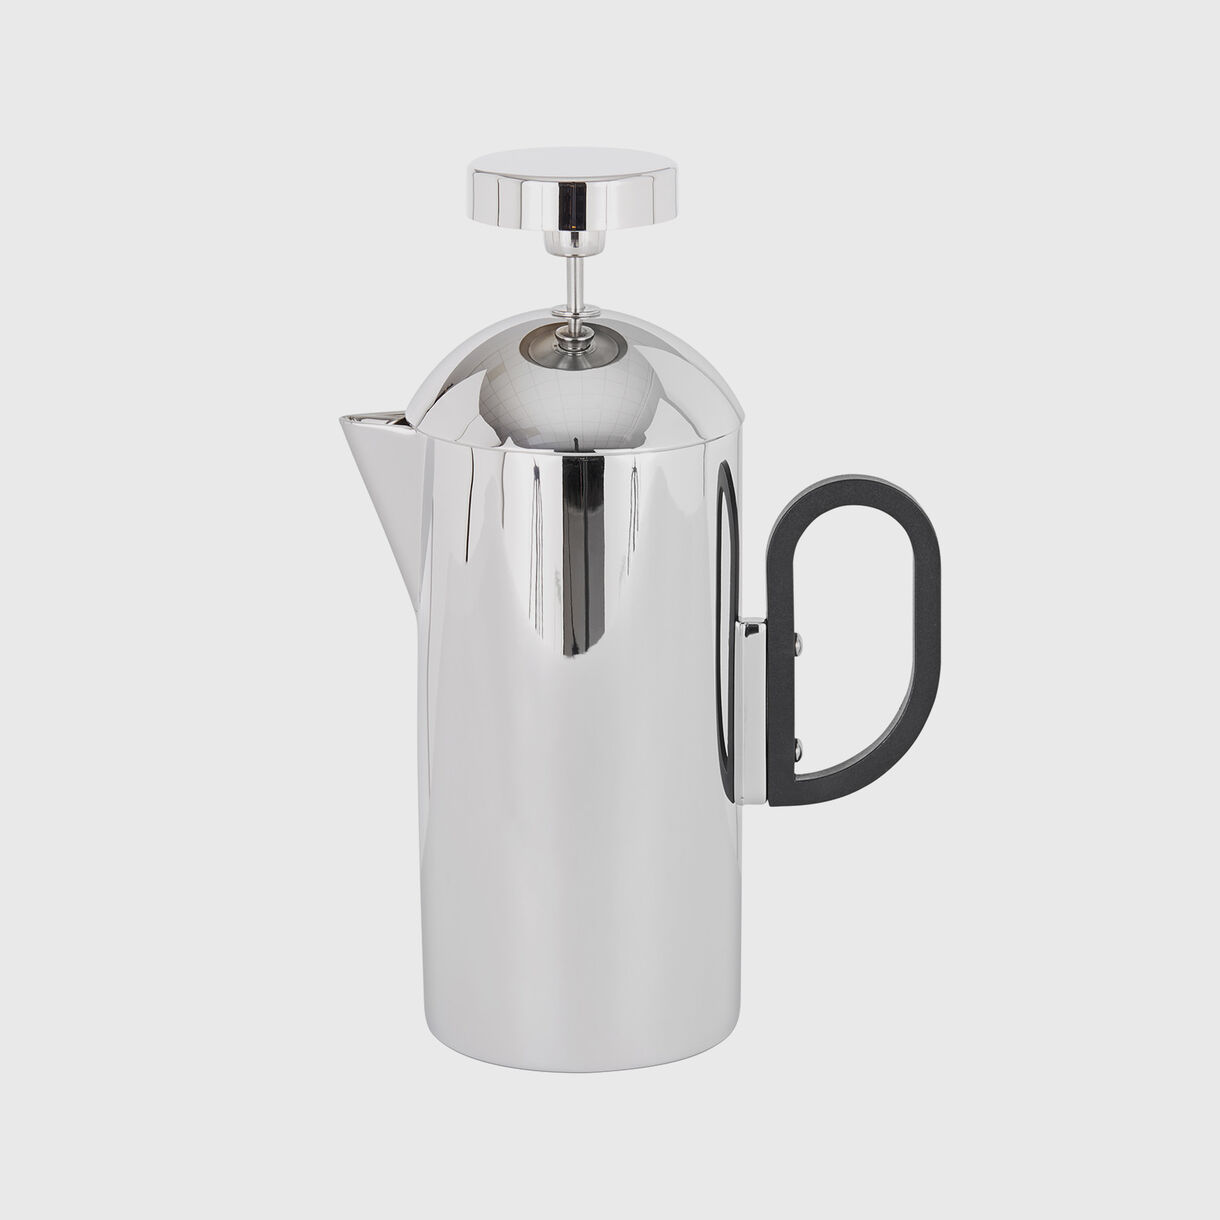 Brew Cafetiere, Chrome